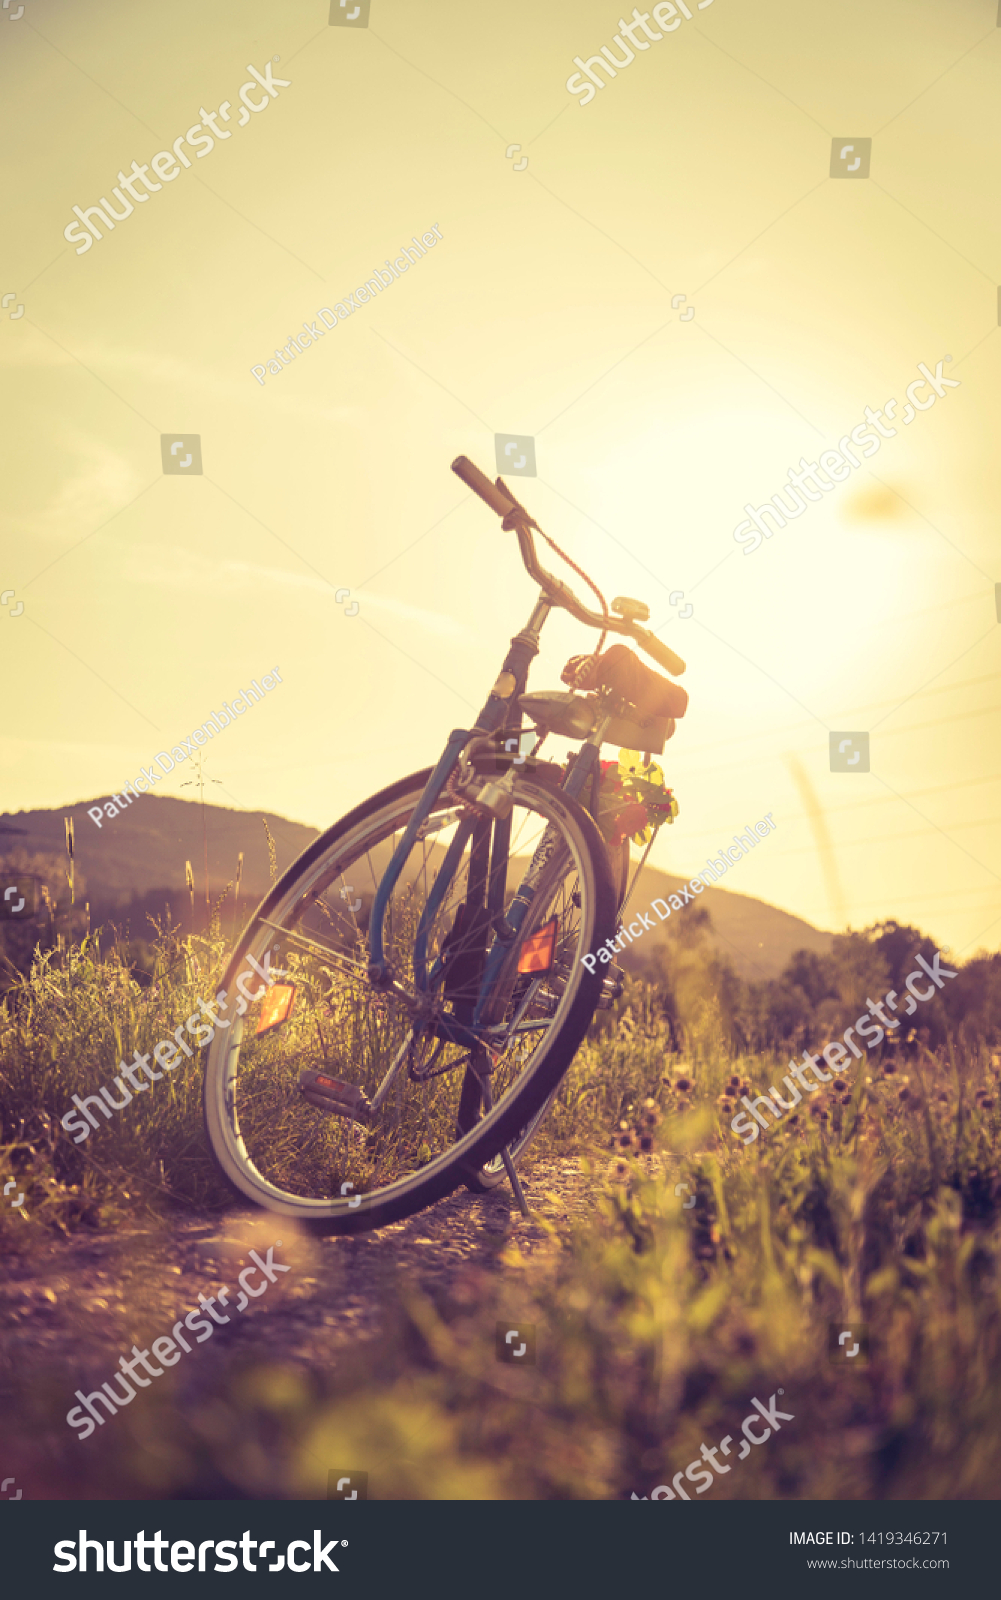 Blue classic bicycle is standing on a green field, sundown scenery #1419346271